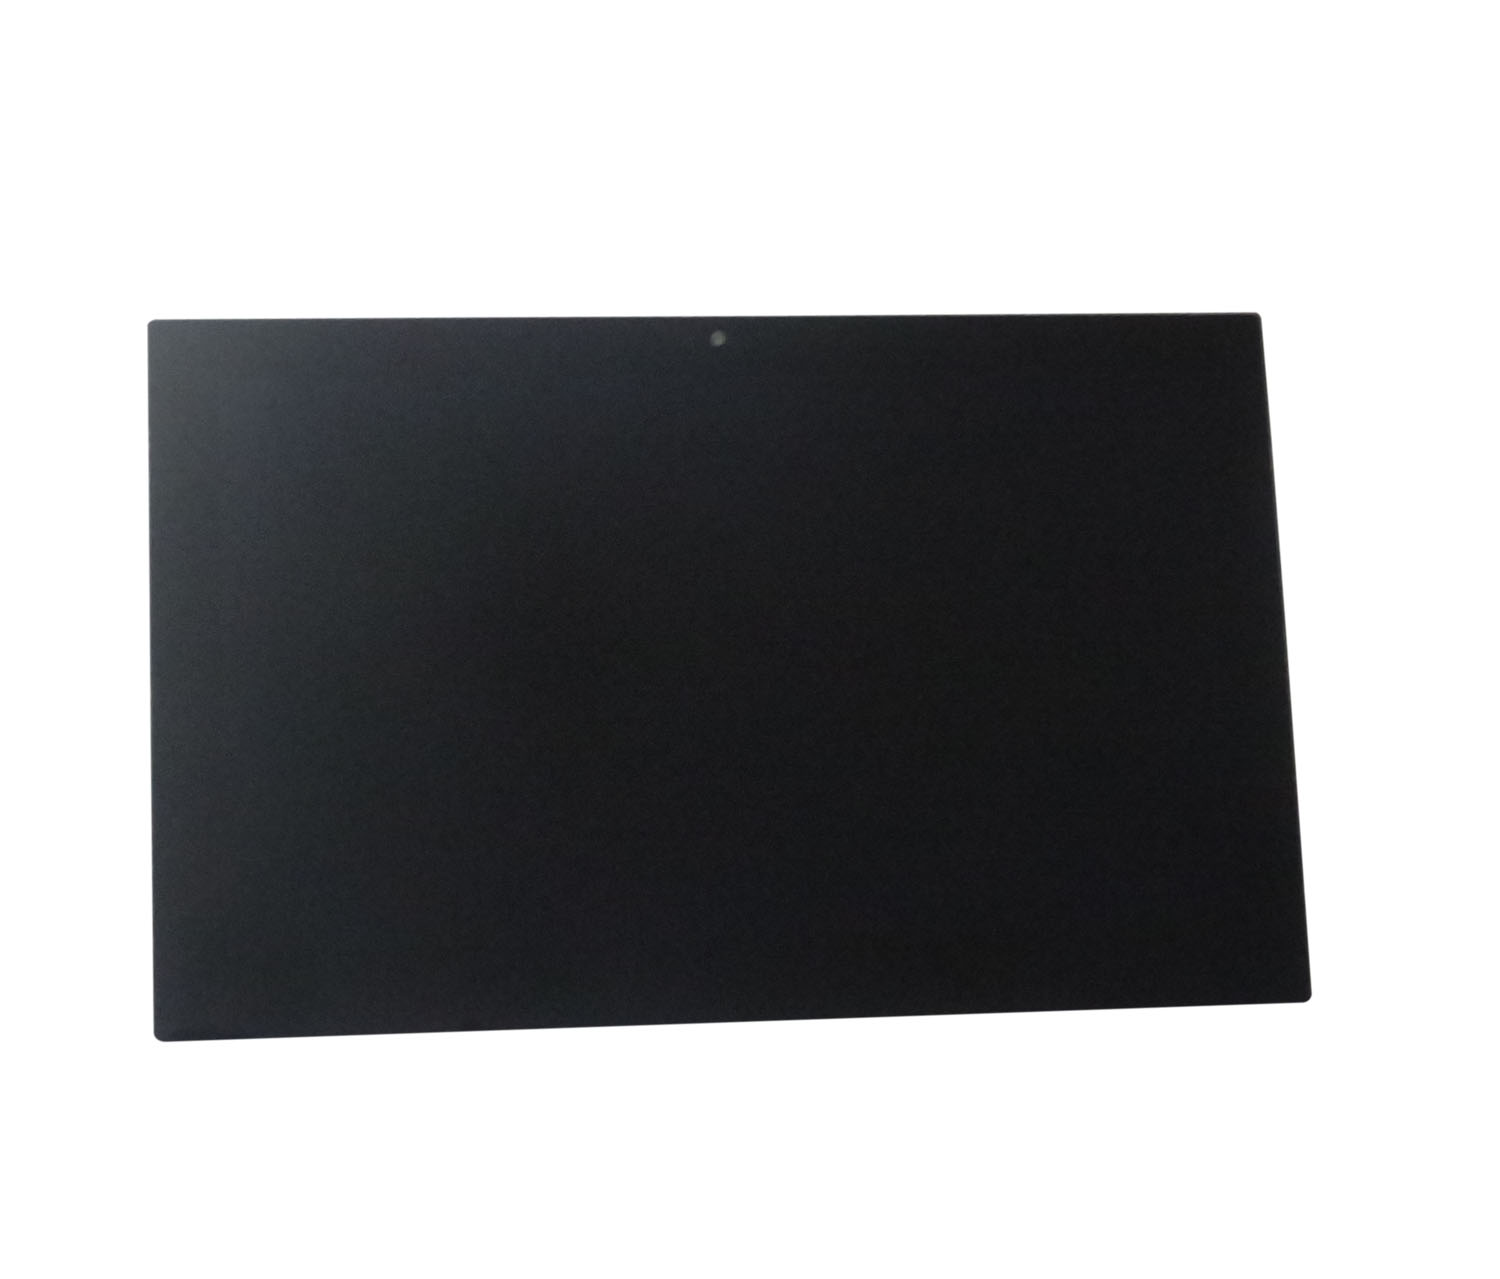 Touch Digitizer + LCD Display for Dell Inspiron 11 3158 HD 1366*768